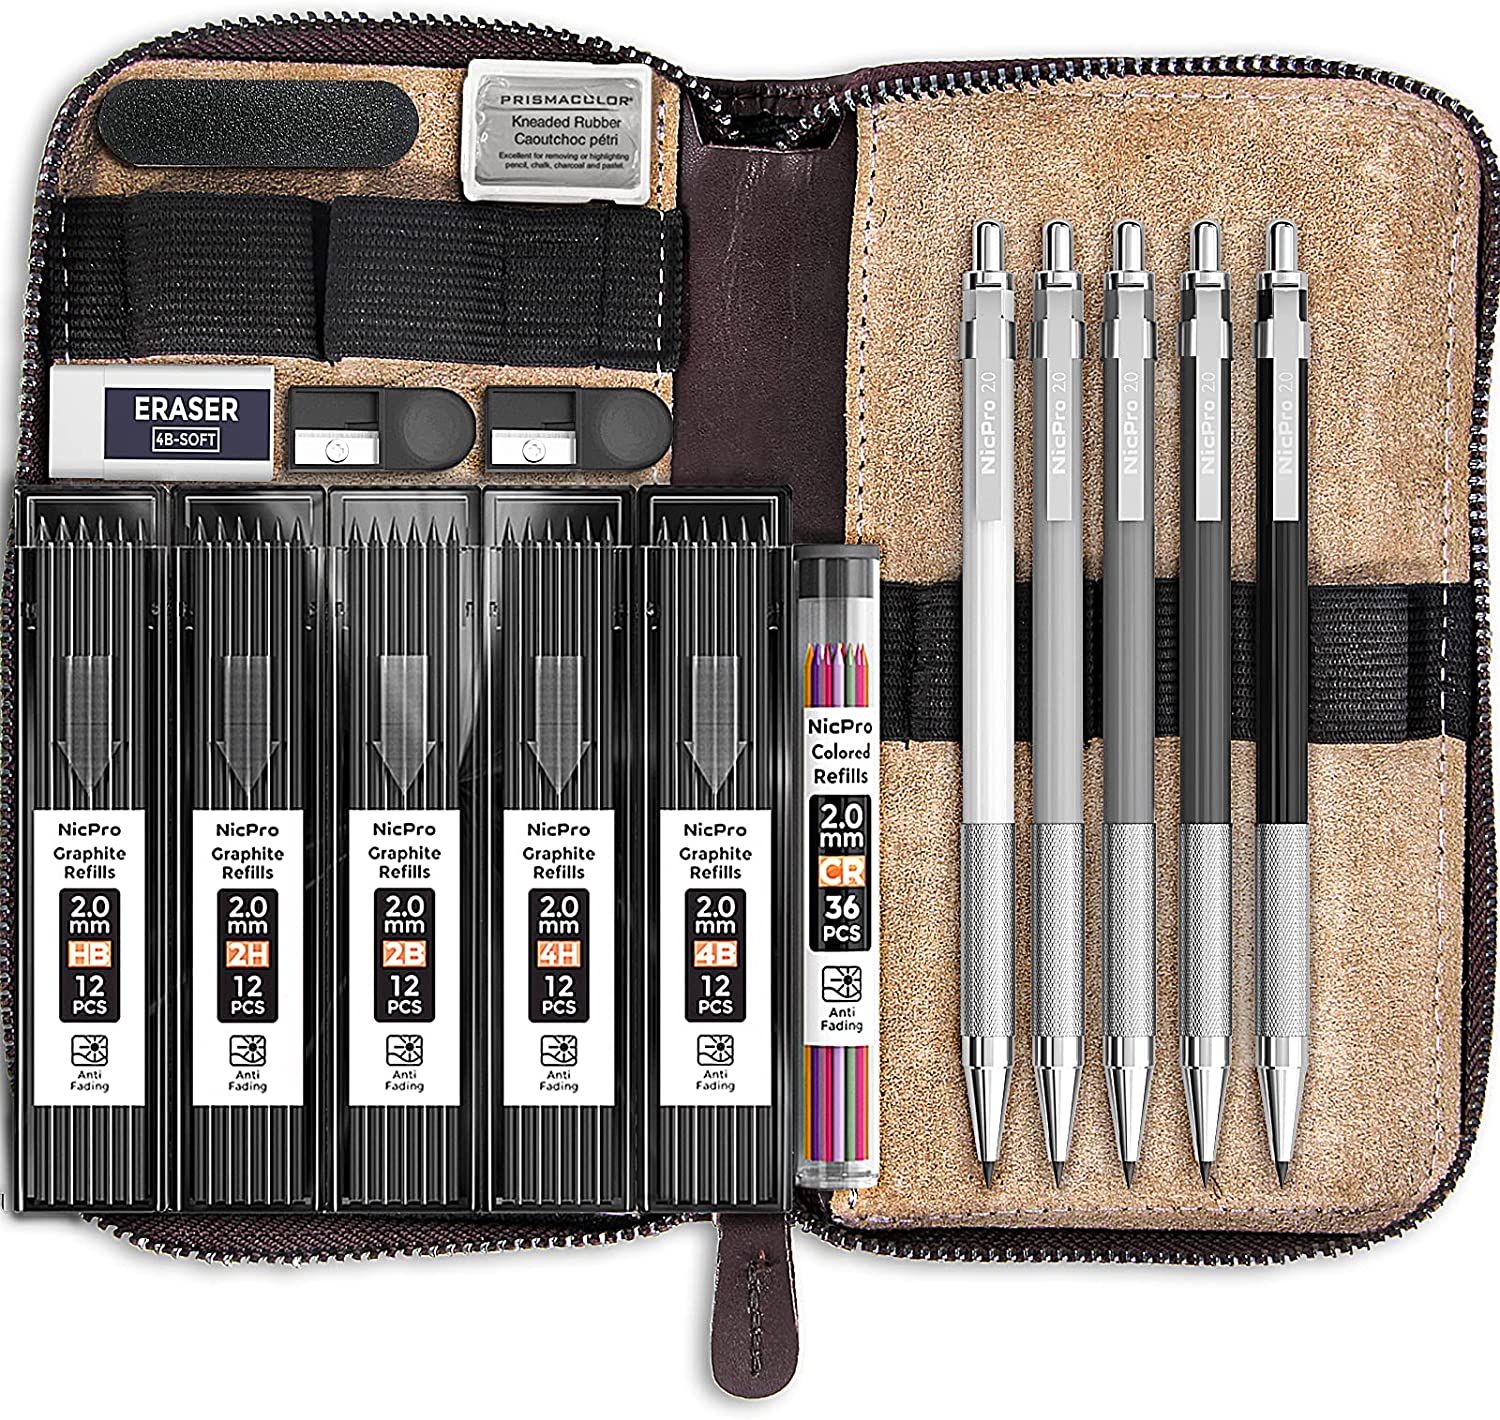 Nicpro 17PCS Metal 2mm Mechanical Pencil Set in Leather Case, 2.0 mm Lead Pencil Holders (4B 2B HB 2H 4H) 6 Tube Black Lead Refills & Colored Lead, Erasers,Sharpener For Art Drafting Sketching Drawing